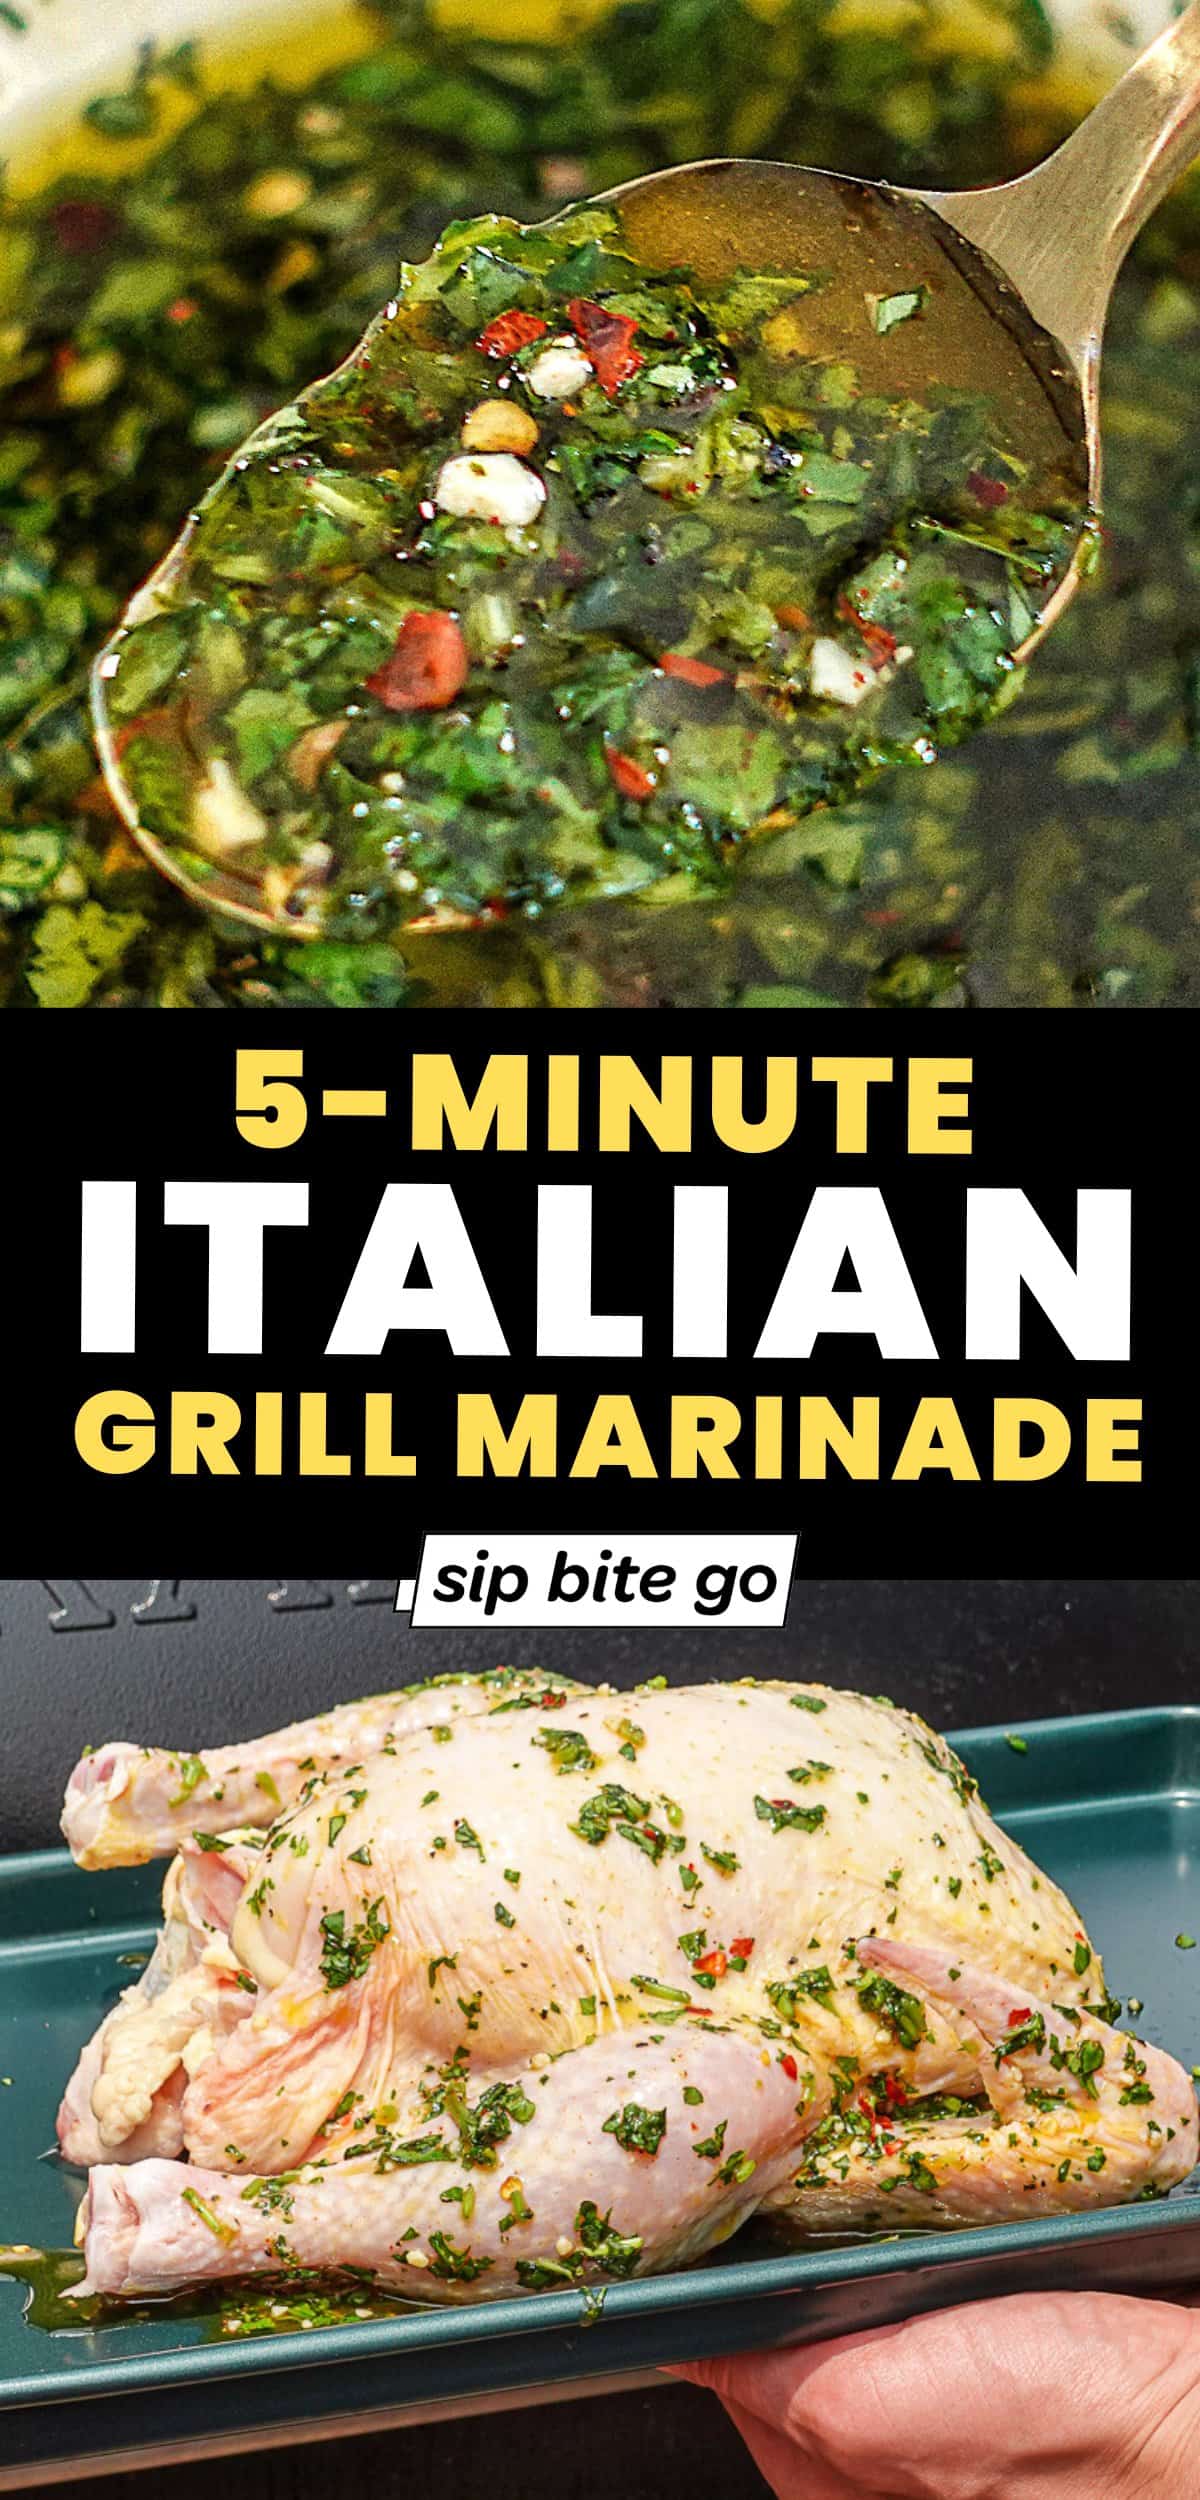 Italian Marinade For Grilled Foods Recipe